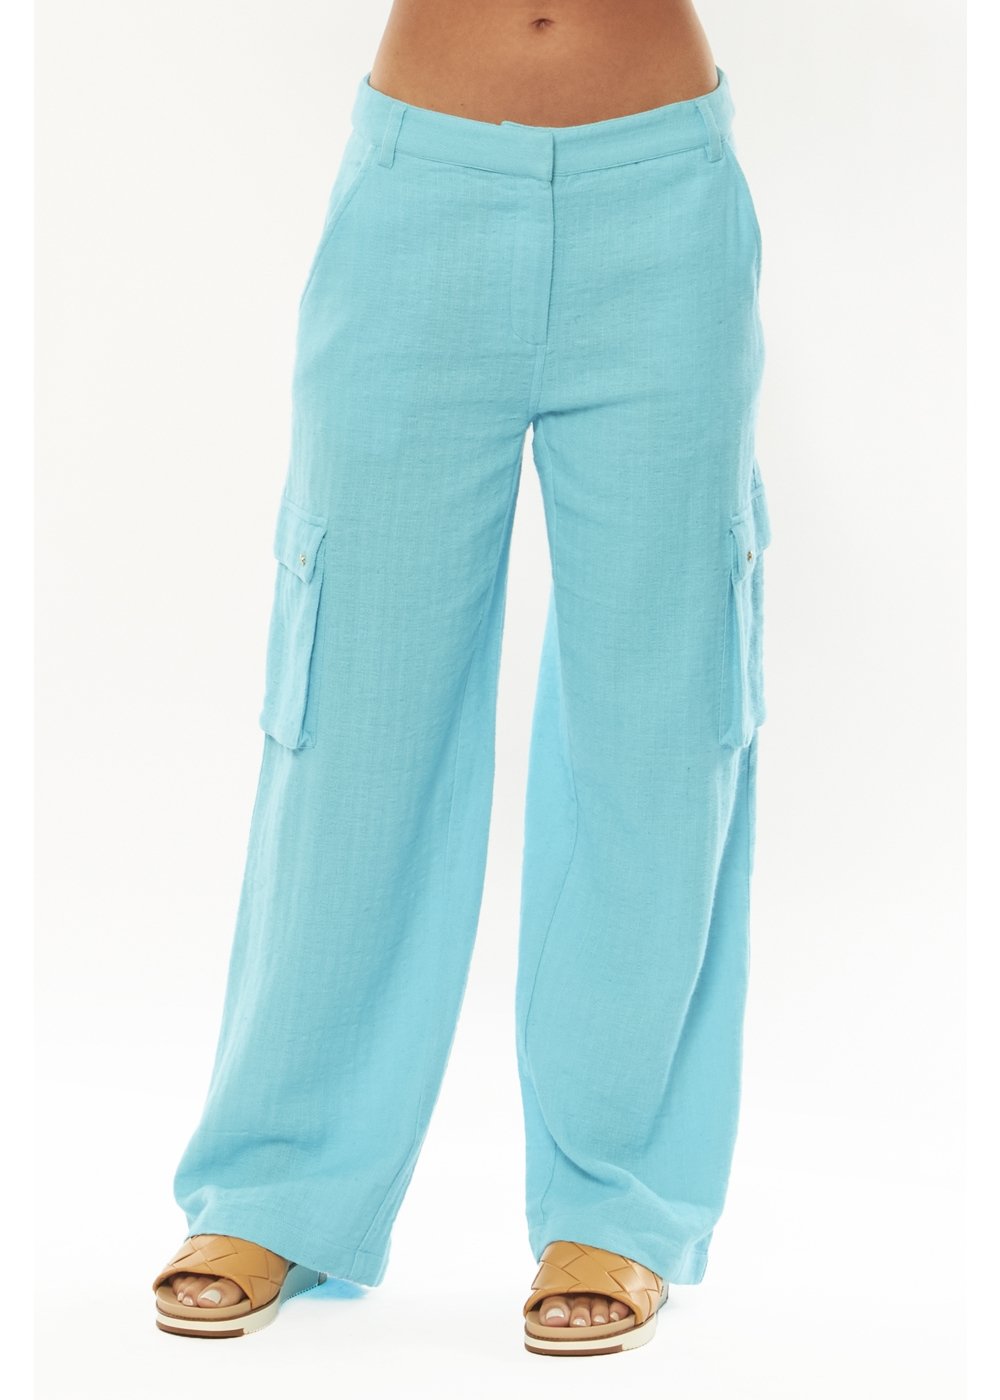 IN HARMONY WOVEN PANT